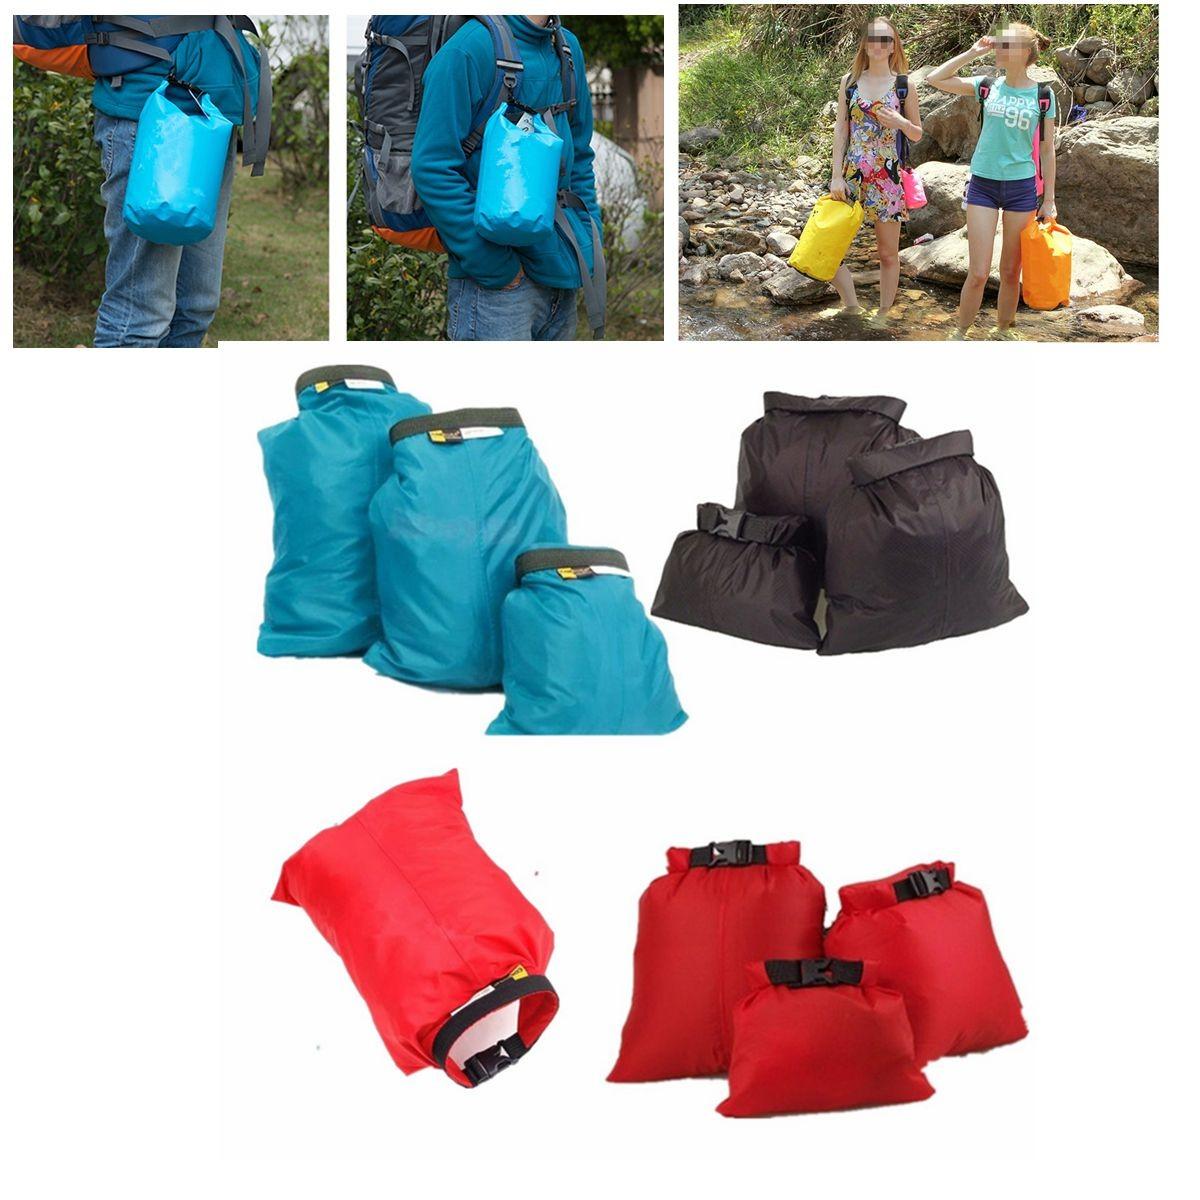 IPRee 3 PCS Travel Storage Bag Waterproof Dry Sack Light Weight Portable Pouch For Camping Hiking 